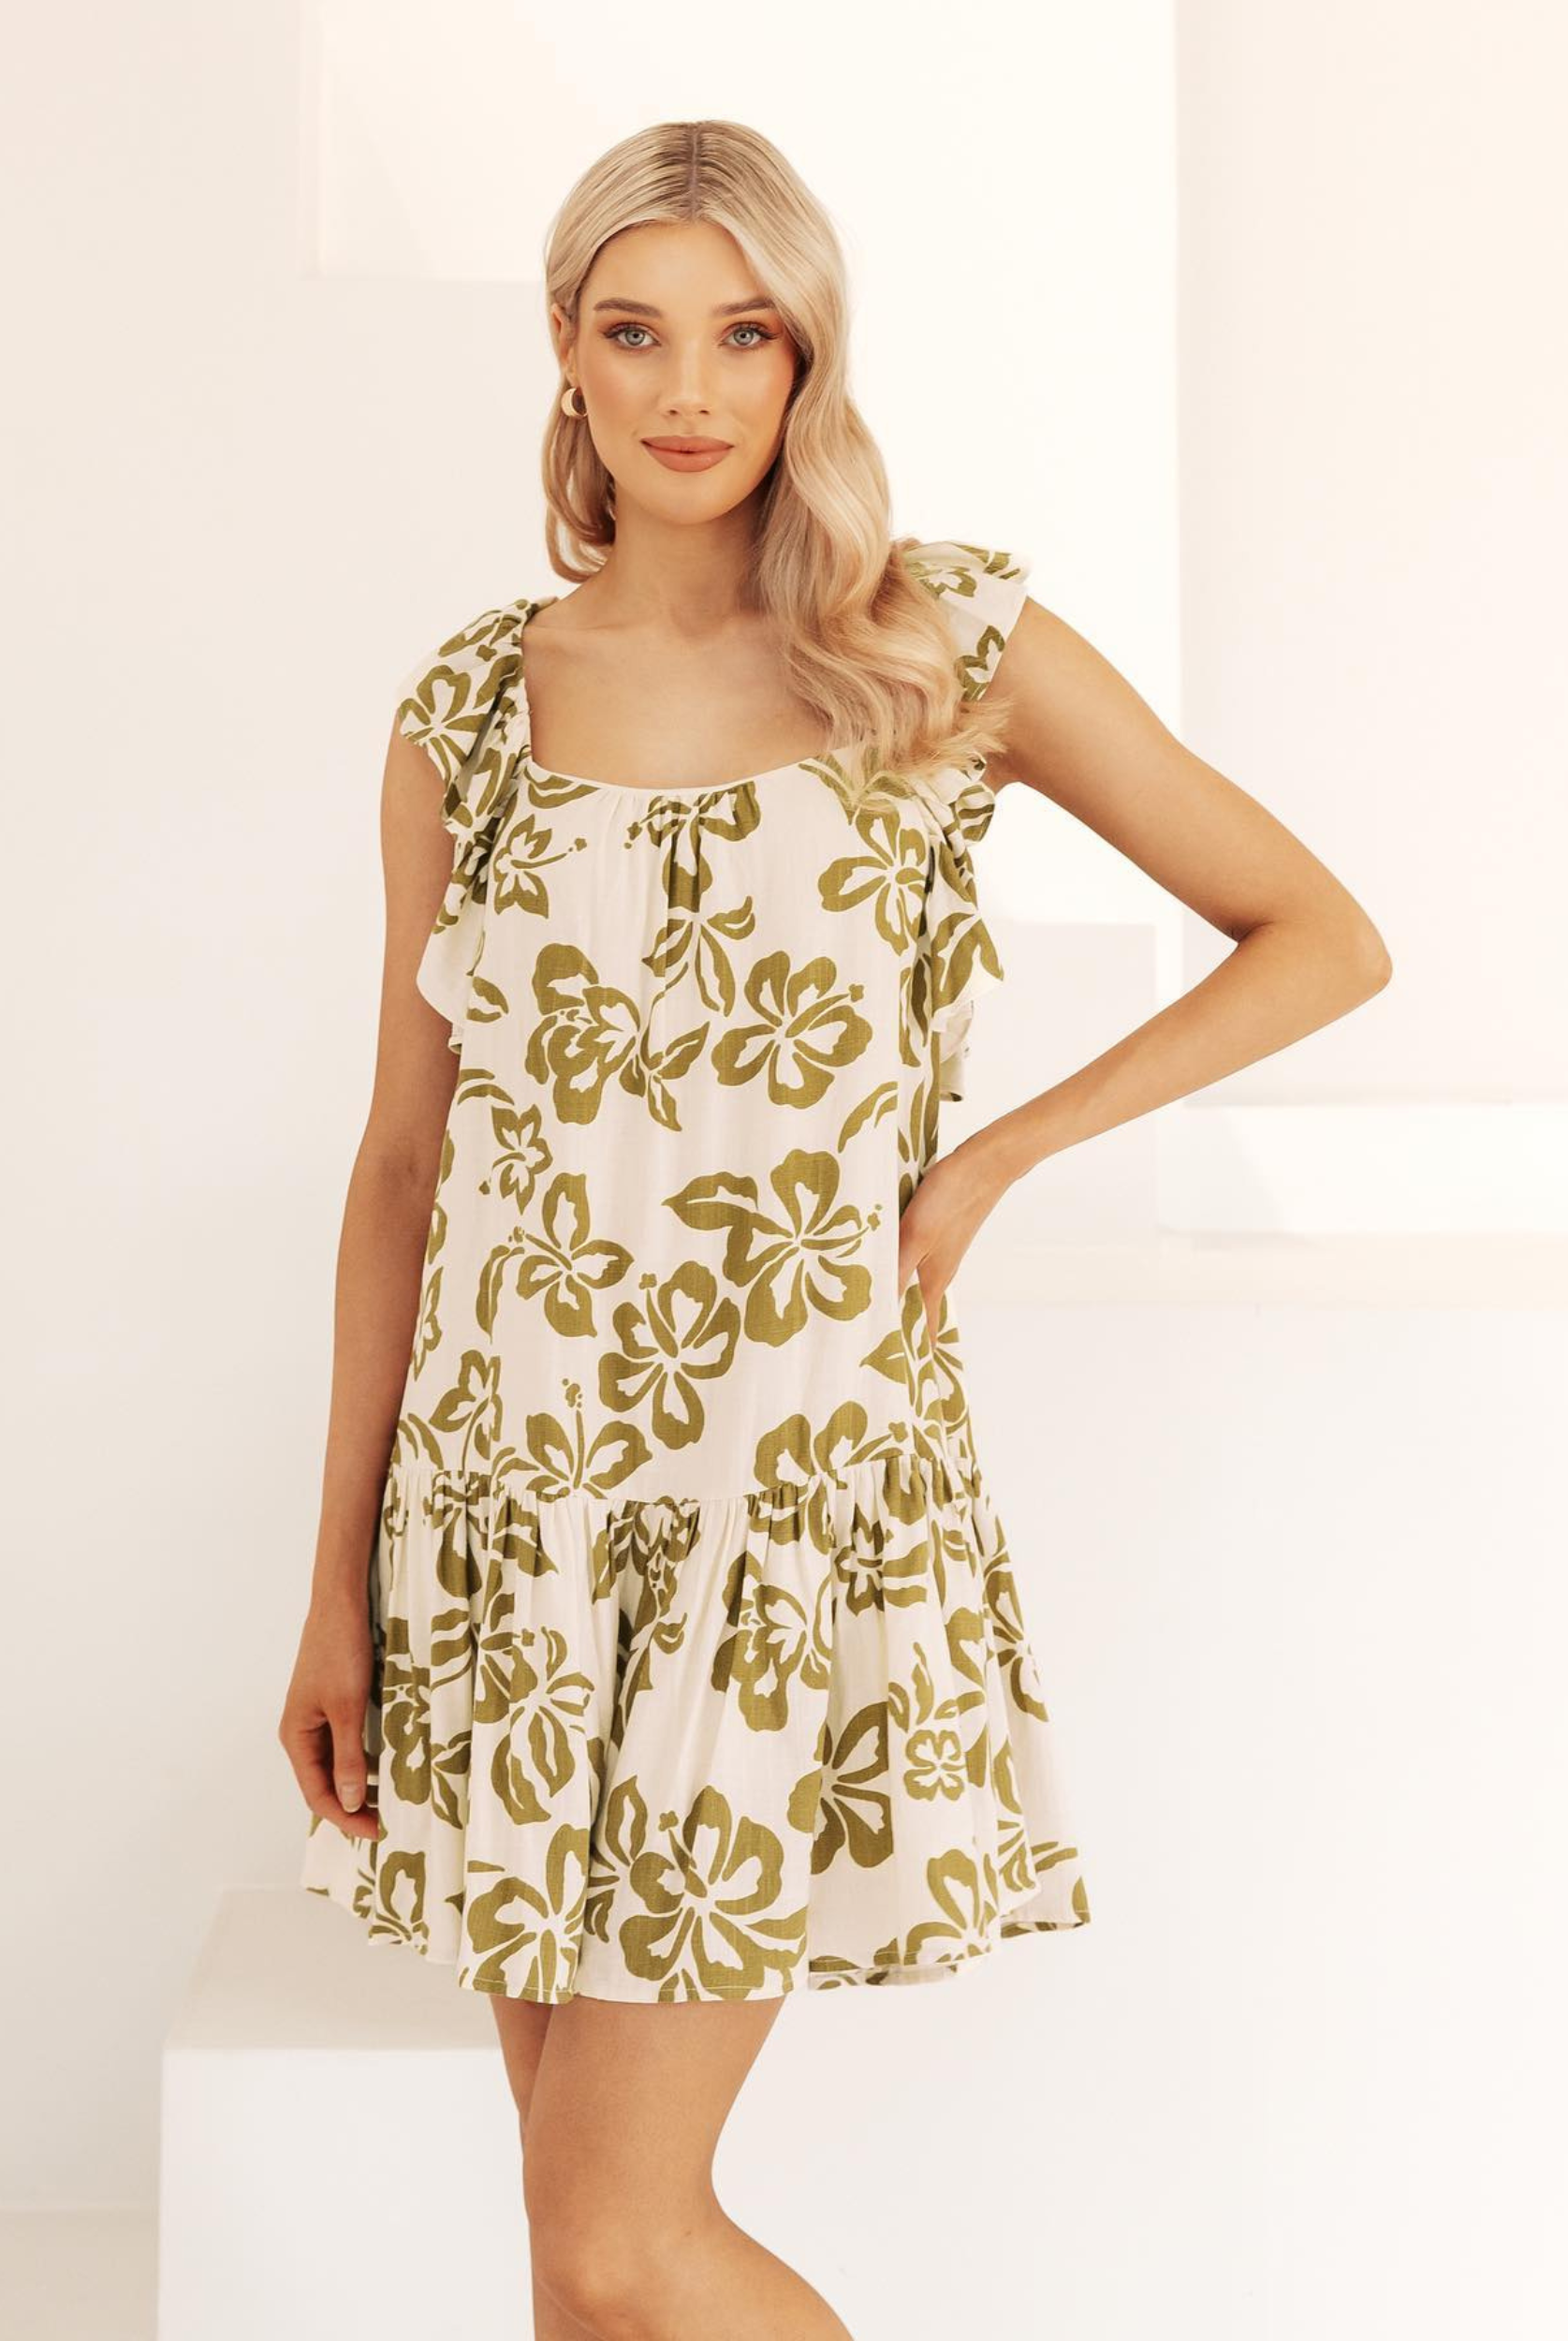 Tropical floral mini dress with ruffle detail shoulders